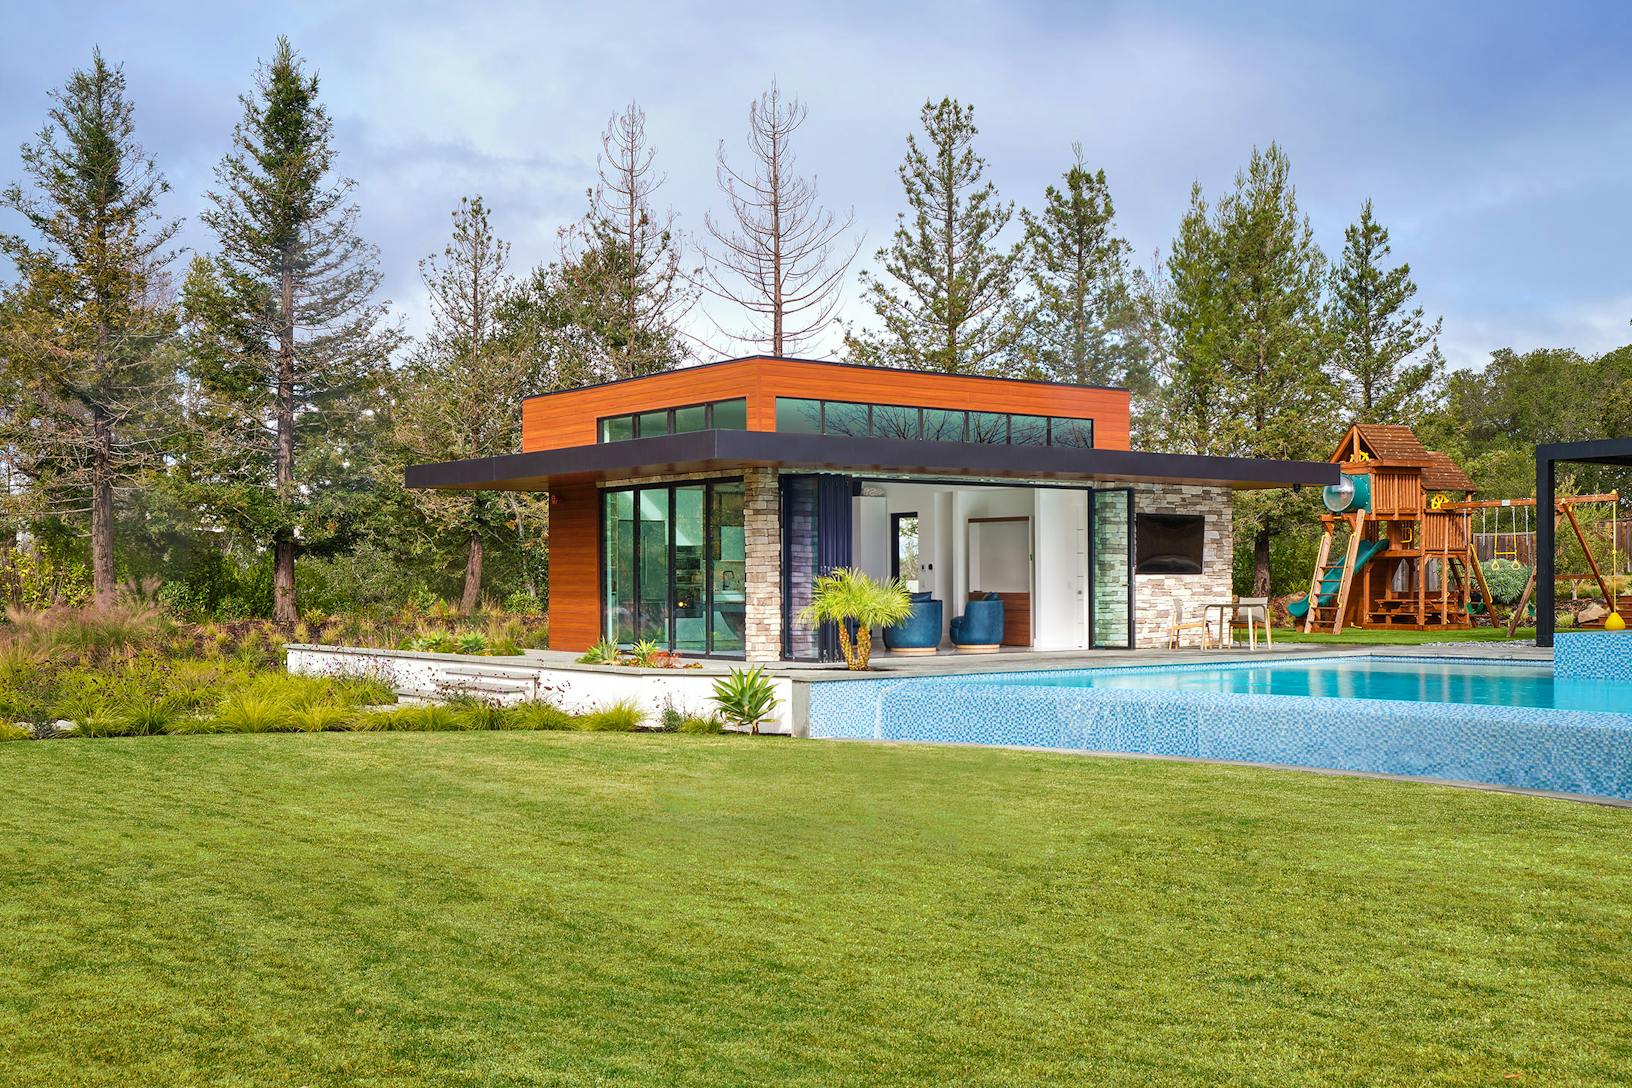 A contemporary home with bifold glass walls and a large swimming pool